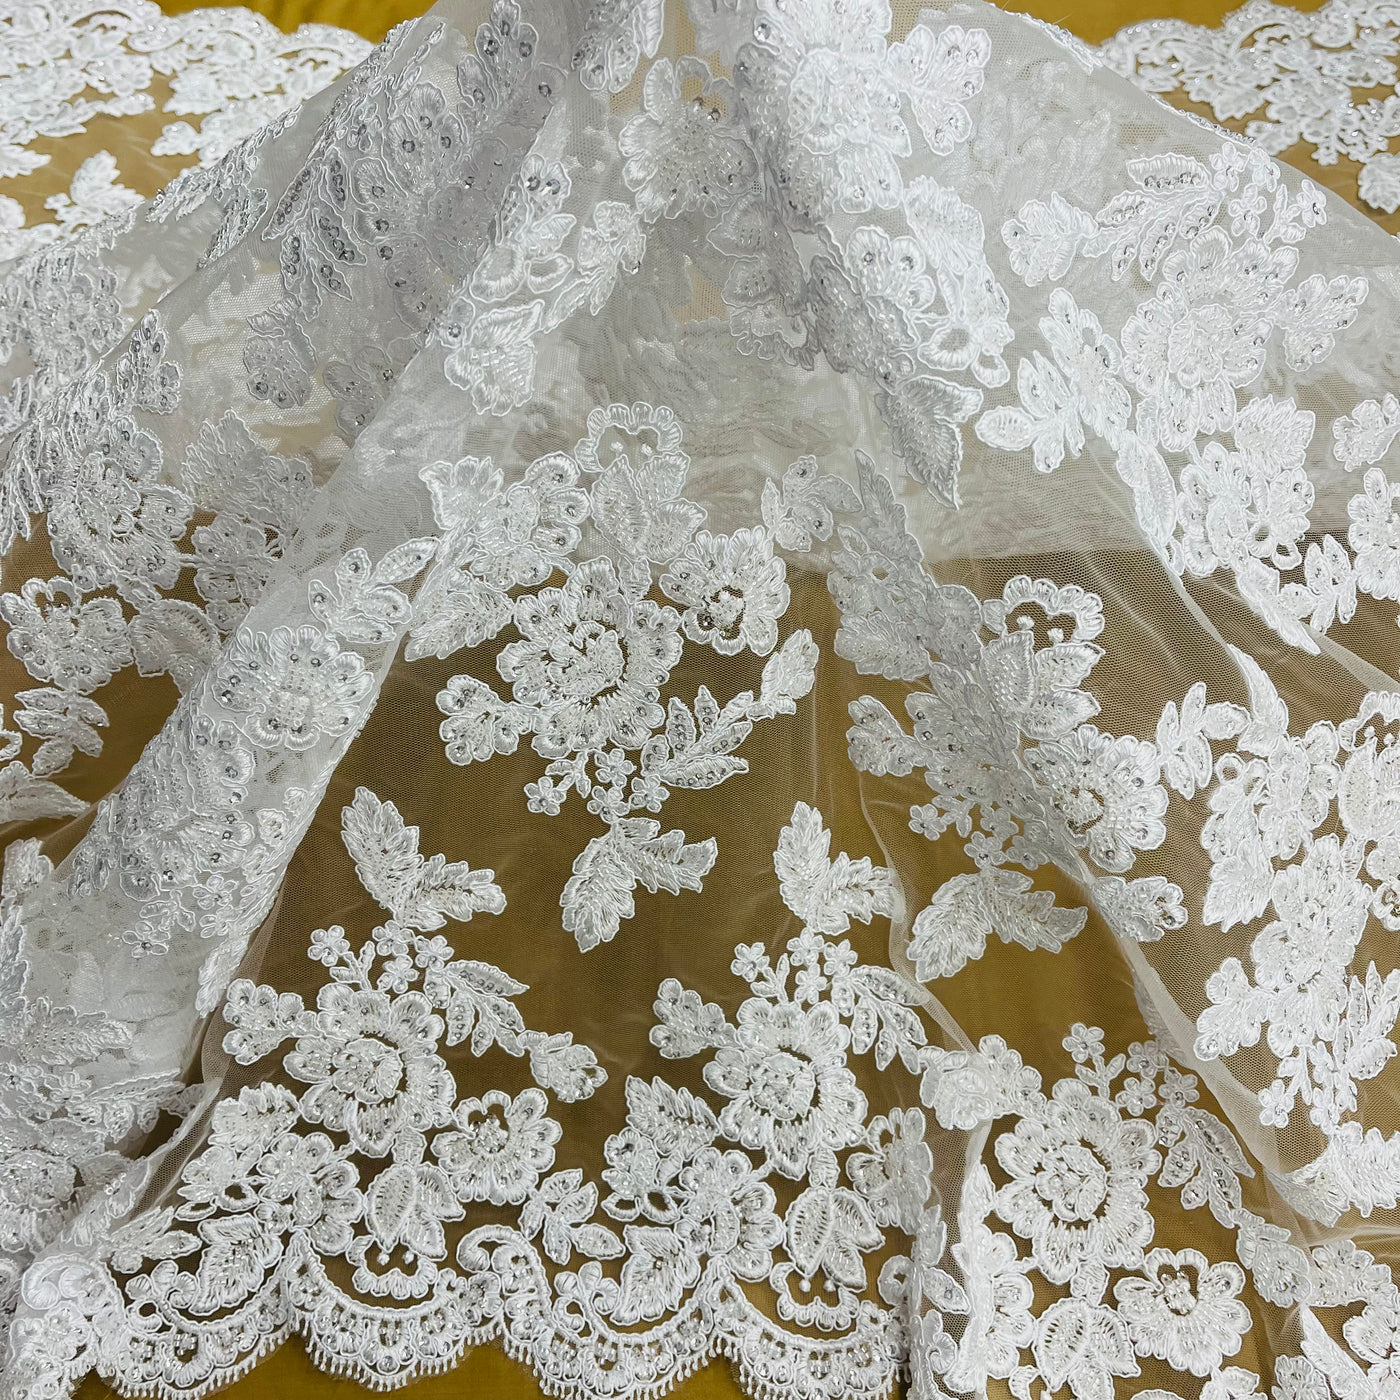 Embroidered & Corded Gold Net Mesh Fabric with Sequin & Beads. Sold by the yard Lace Usa